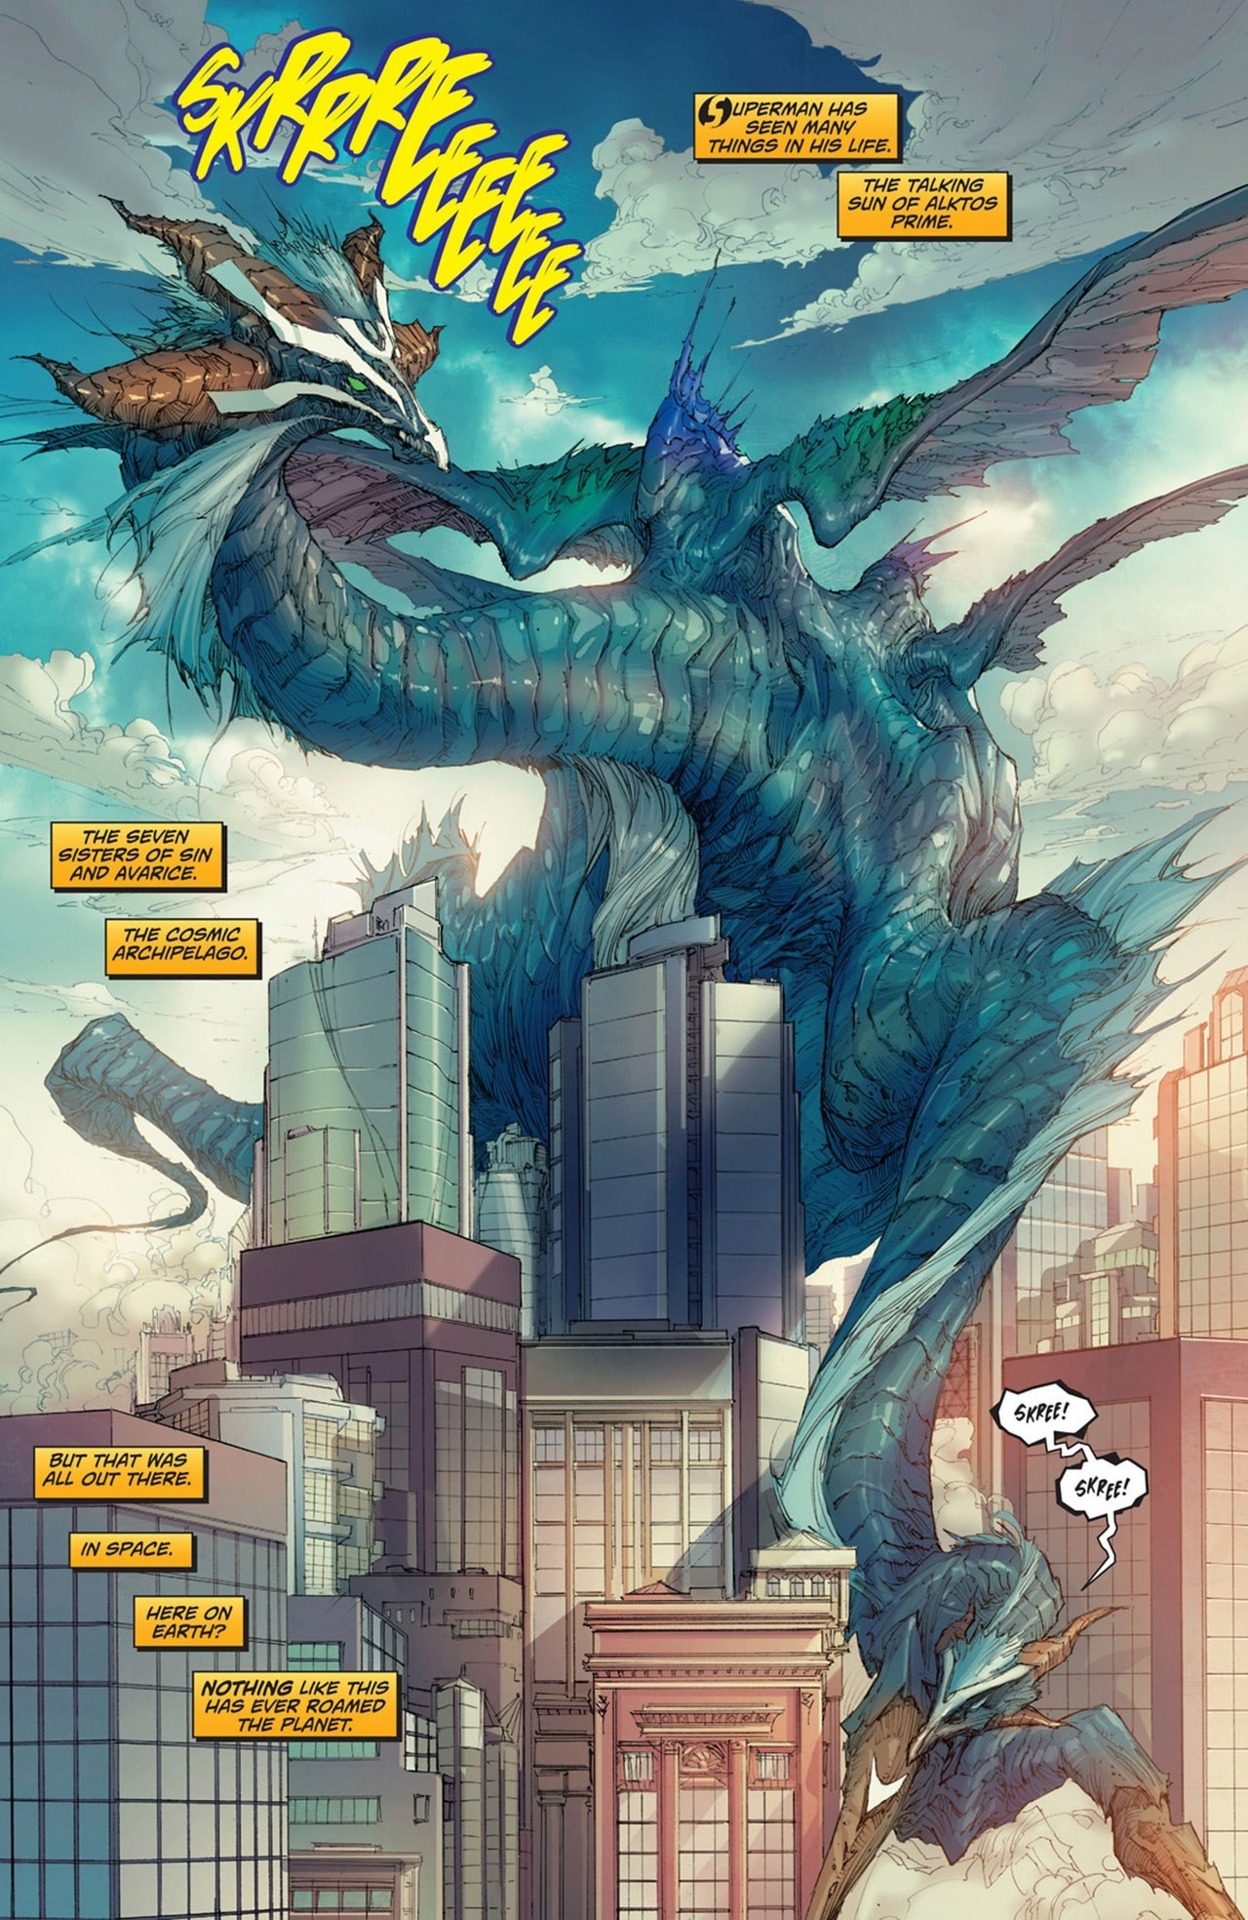 Godzilla here there be dragons #3